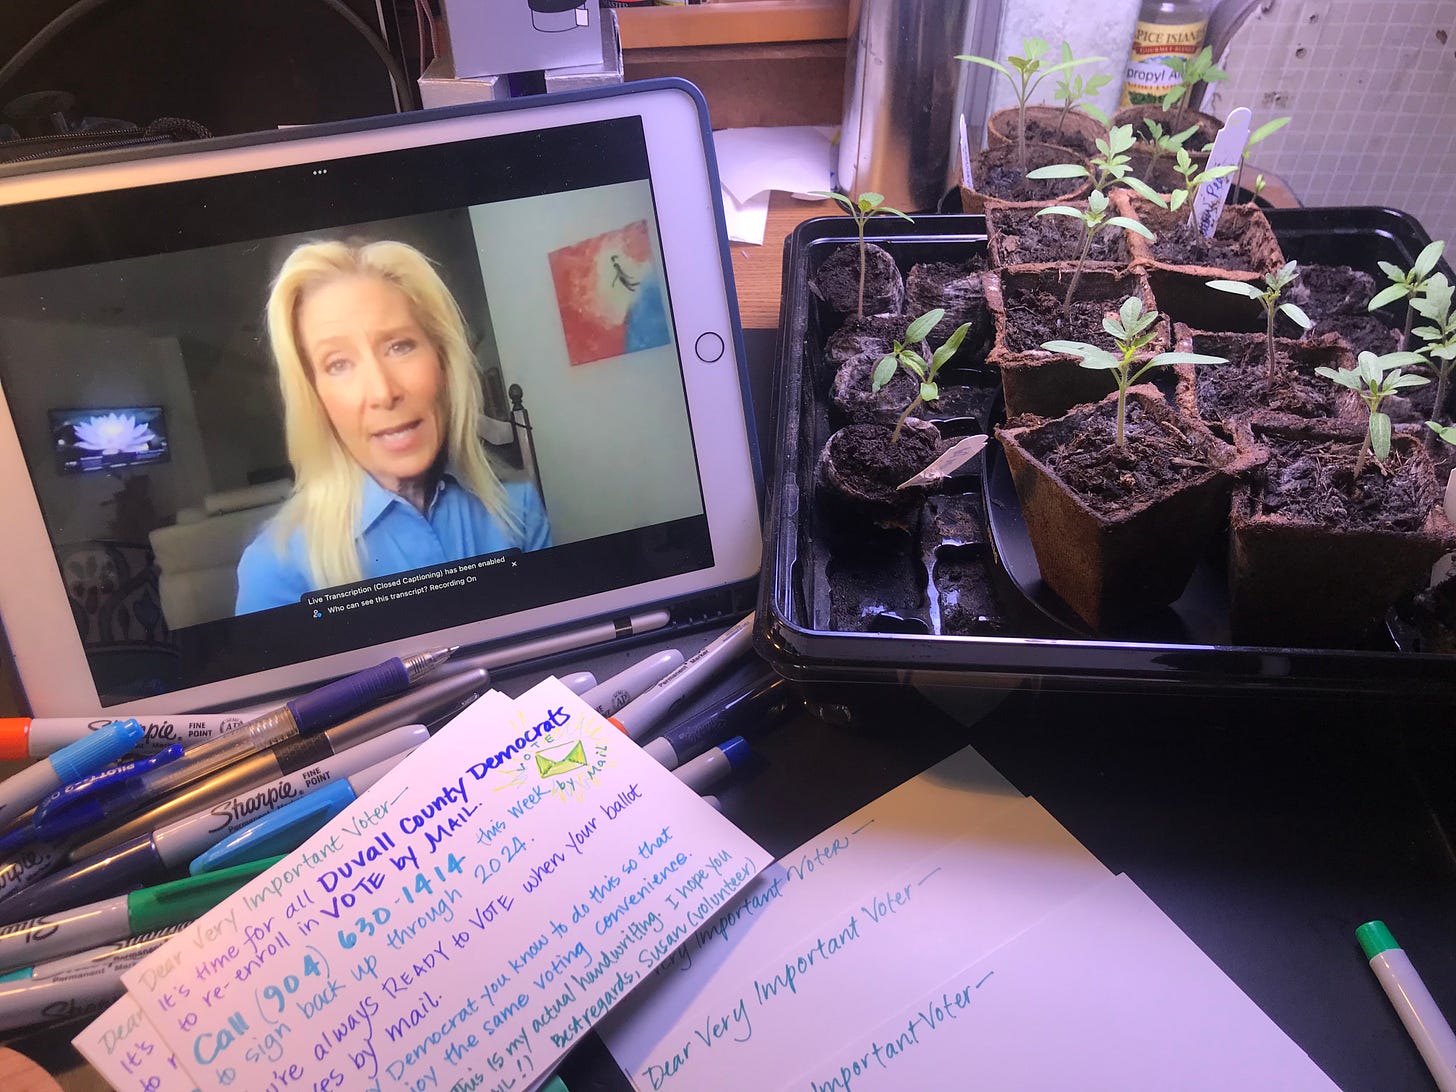 iPad with candidate Donna Deegan speaking, tomato seedlings, and postcards to voters to re-up mail in ballot.